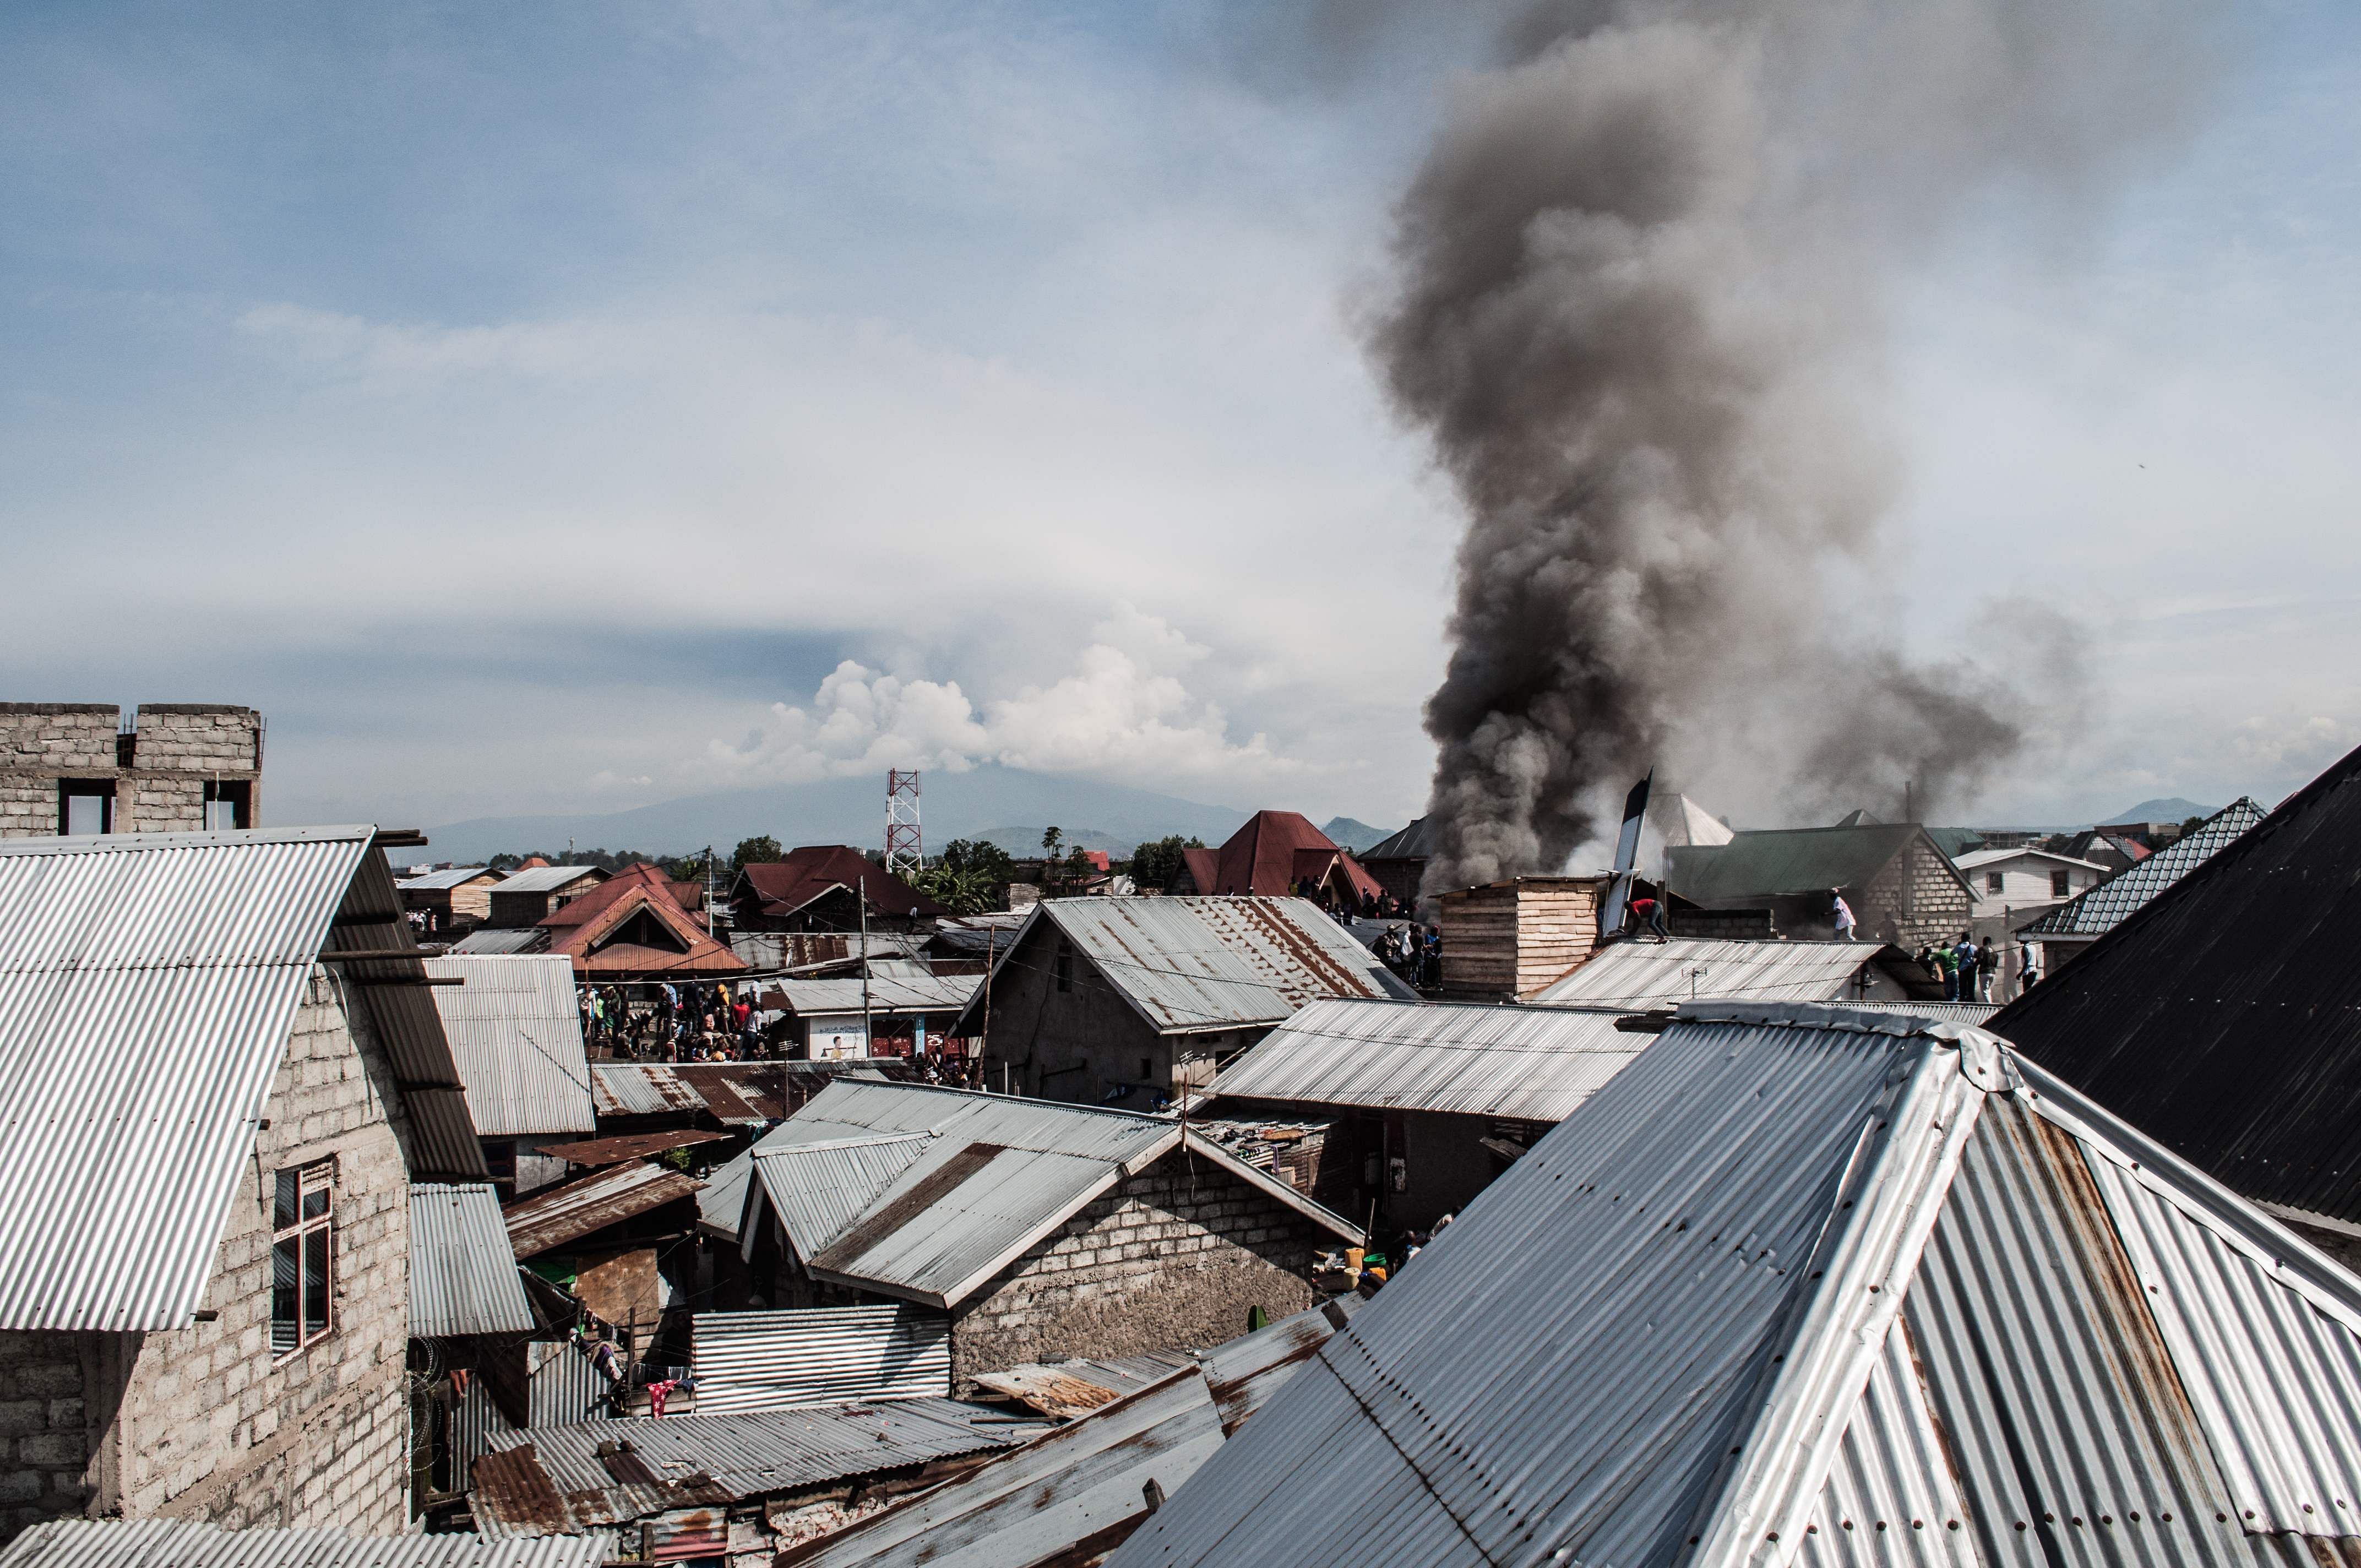 Smoke raises after a small aircraft carrying around 15 passengers crashed in a densely populated area in Goma on the East of the Democratic Republic of Congo. (AFP Photo)